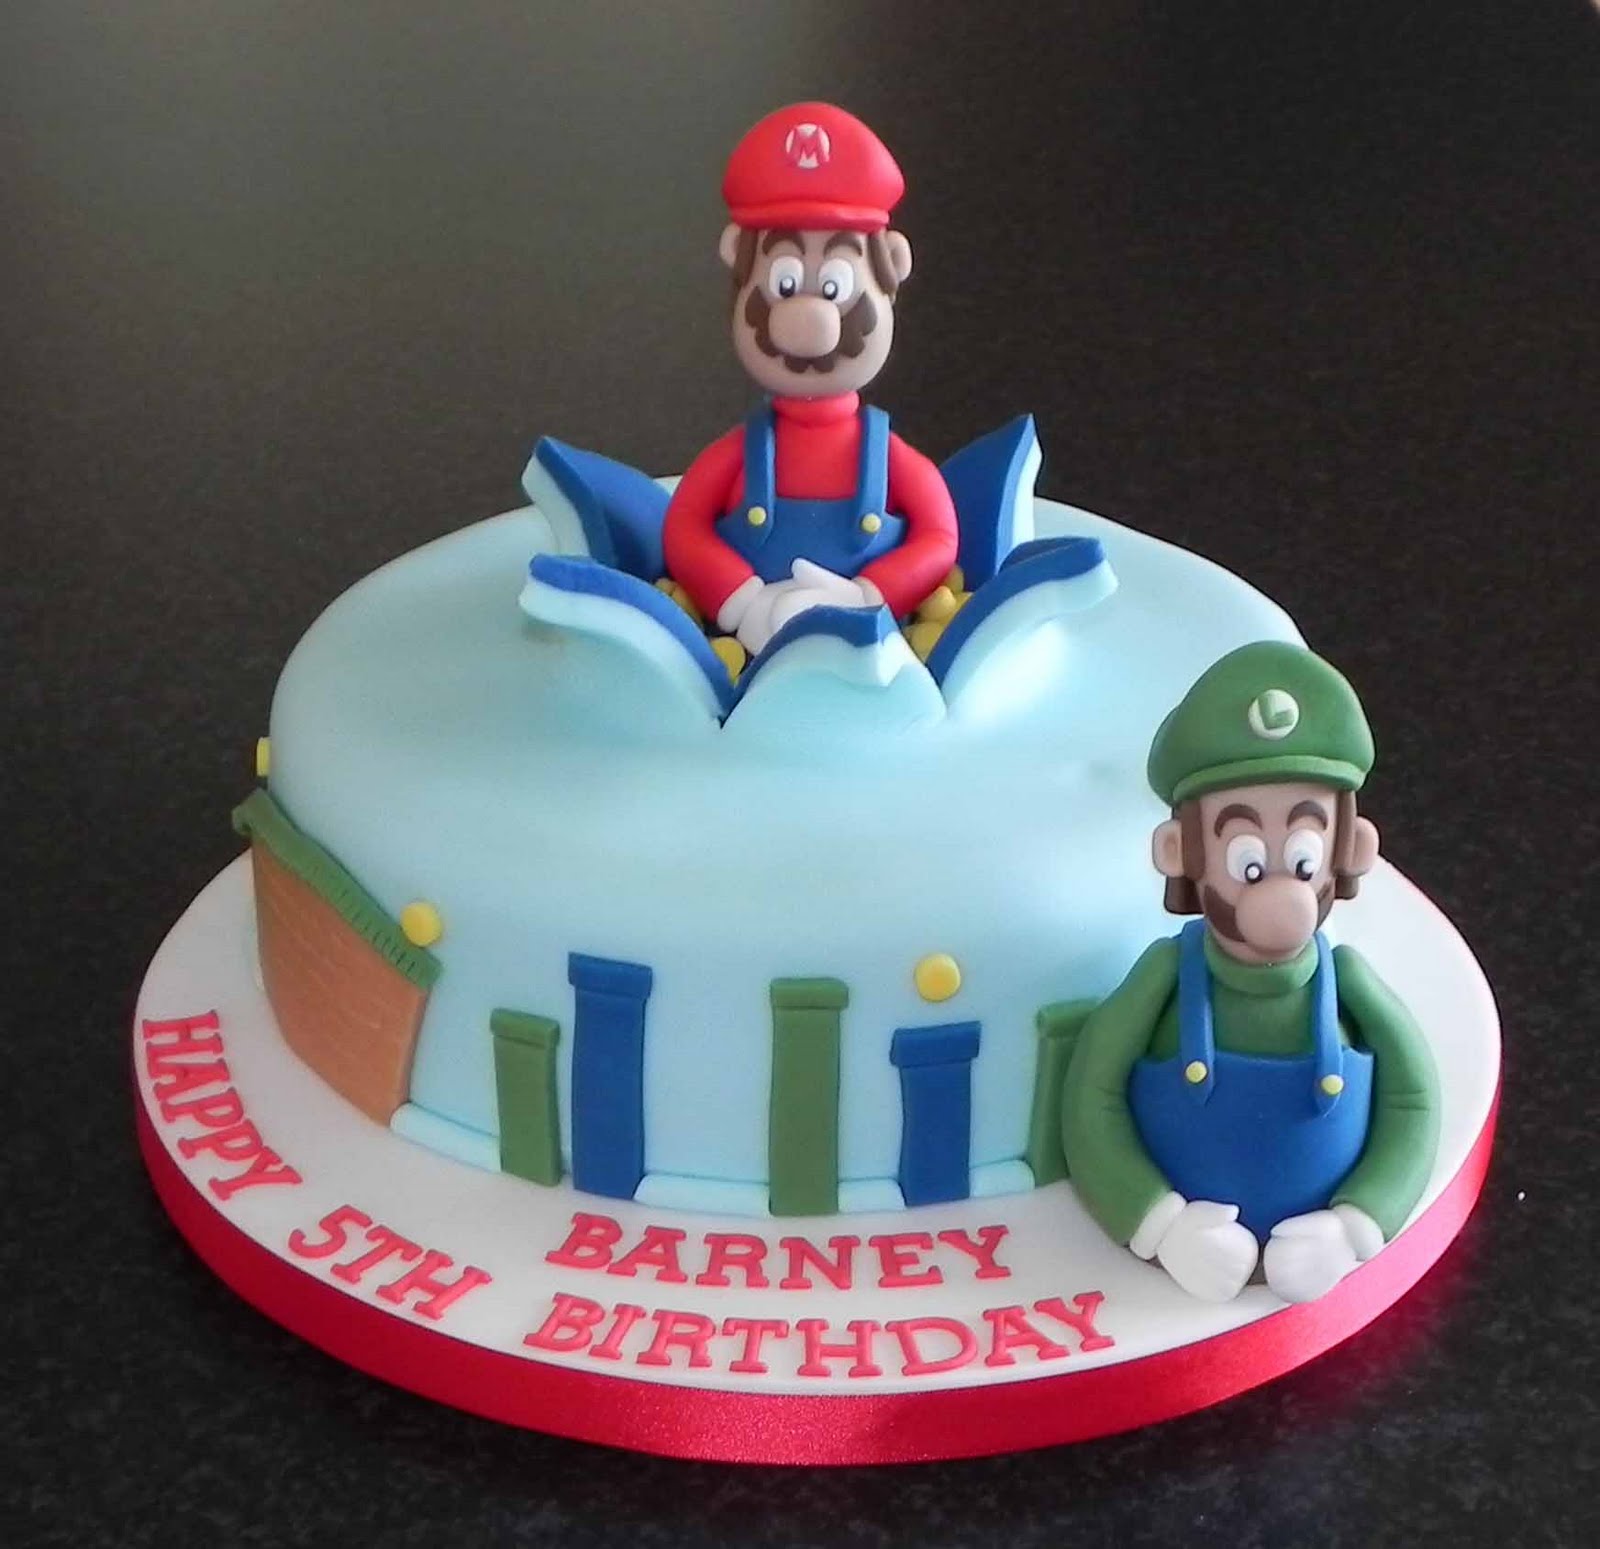 cool easy birthday cake This cake was made for a little boys 5th birthday - he's a big fan of 